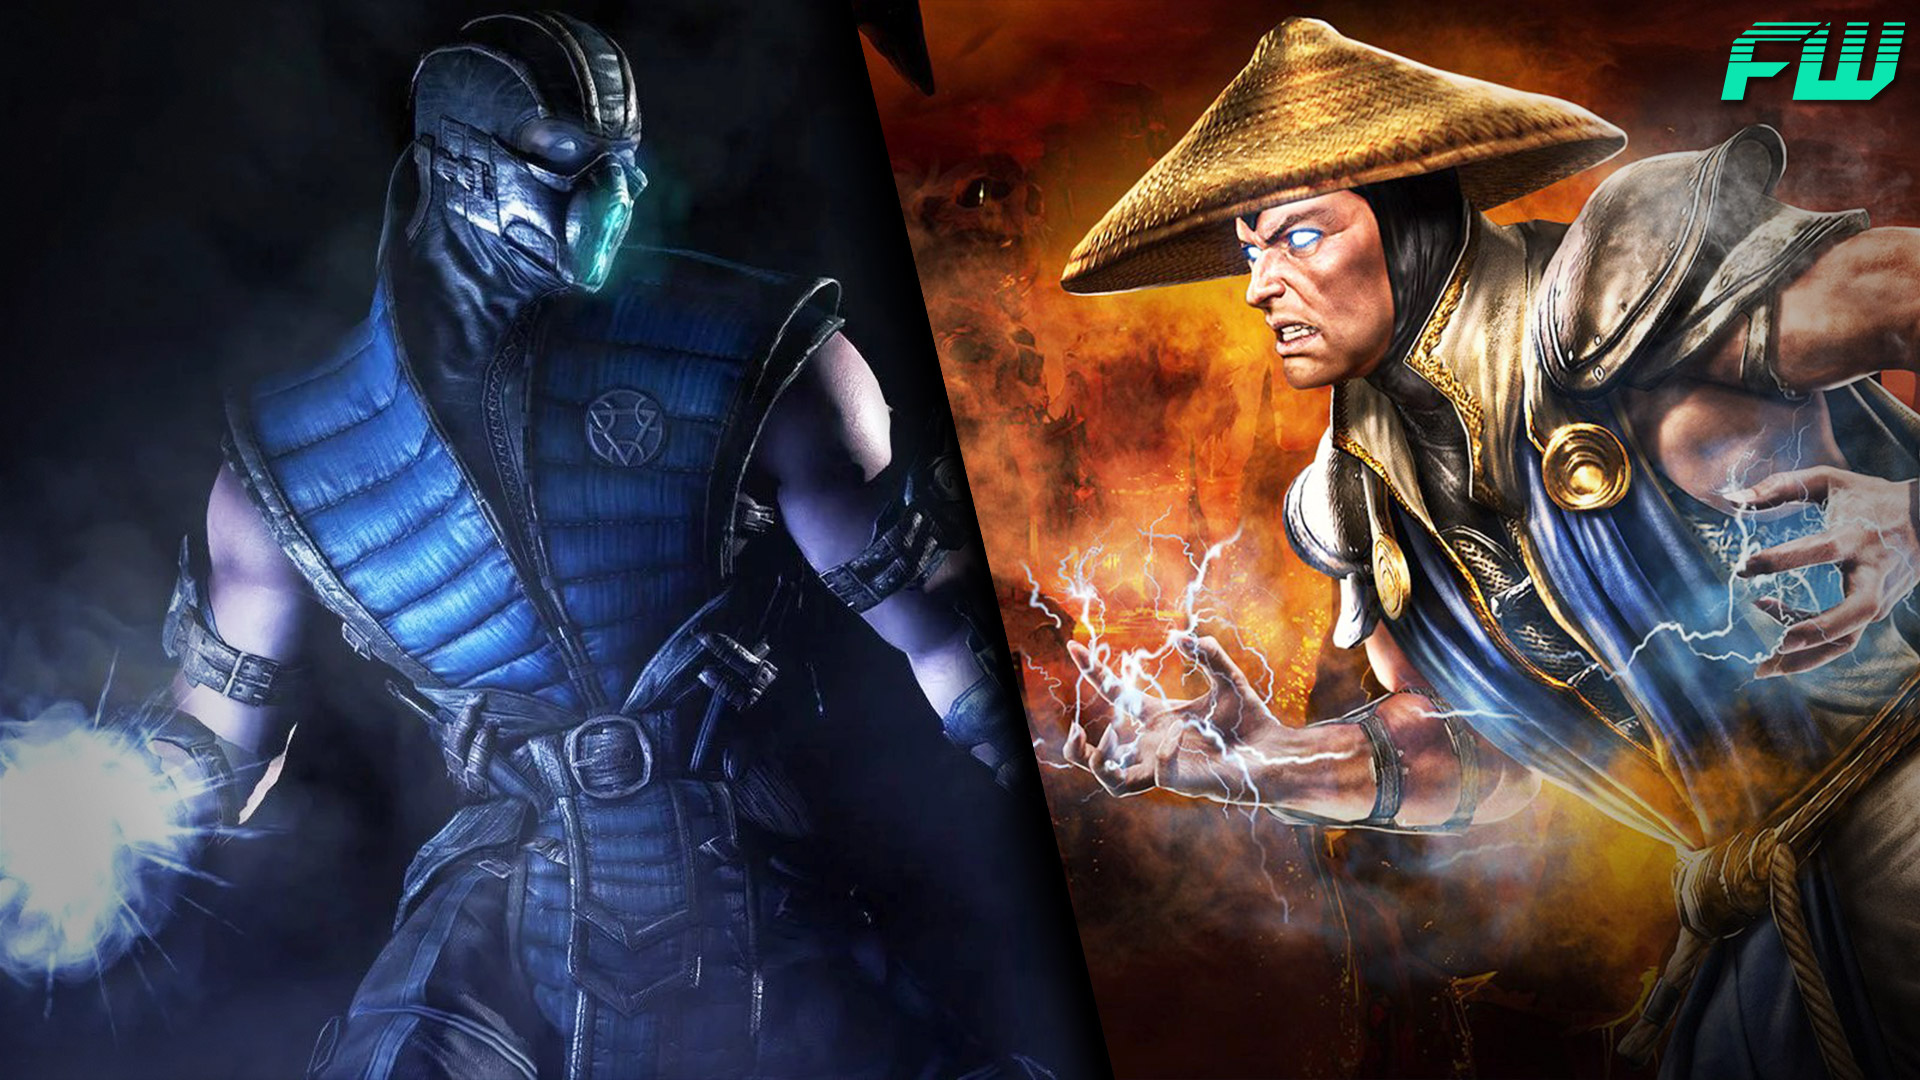 Every Fatality in the New Mortal Kombat 11 Trailer, Ranked